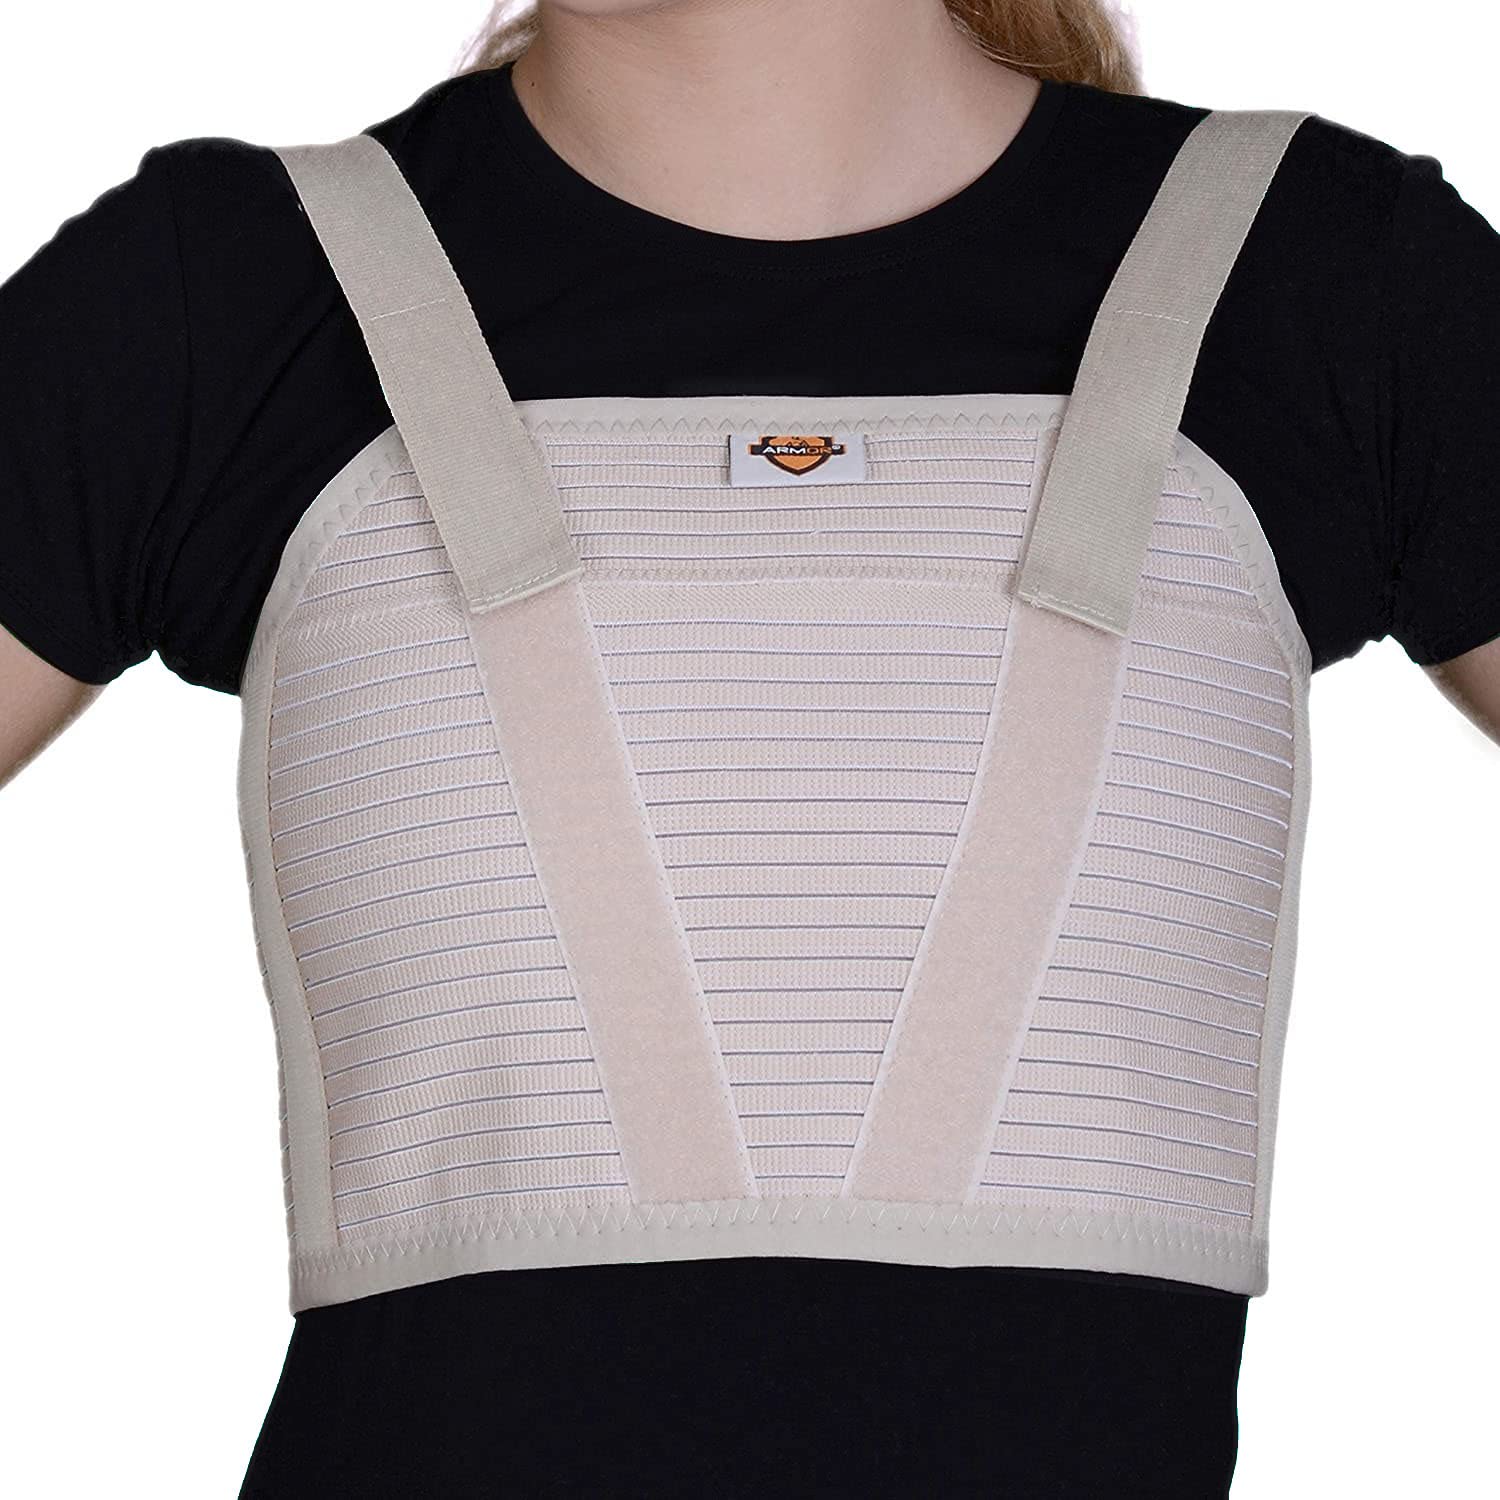 Rib and Chest Support Brace for Post Open Heart and Thoracic